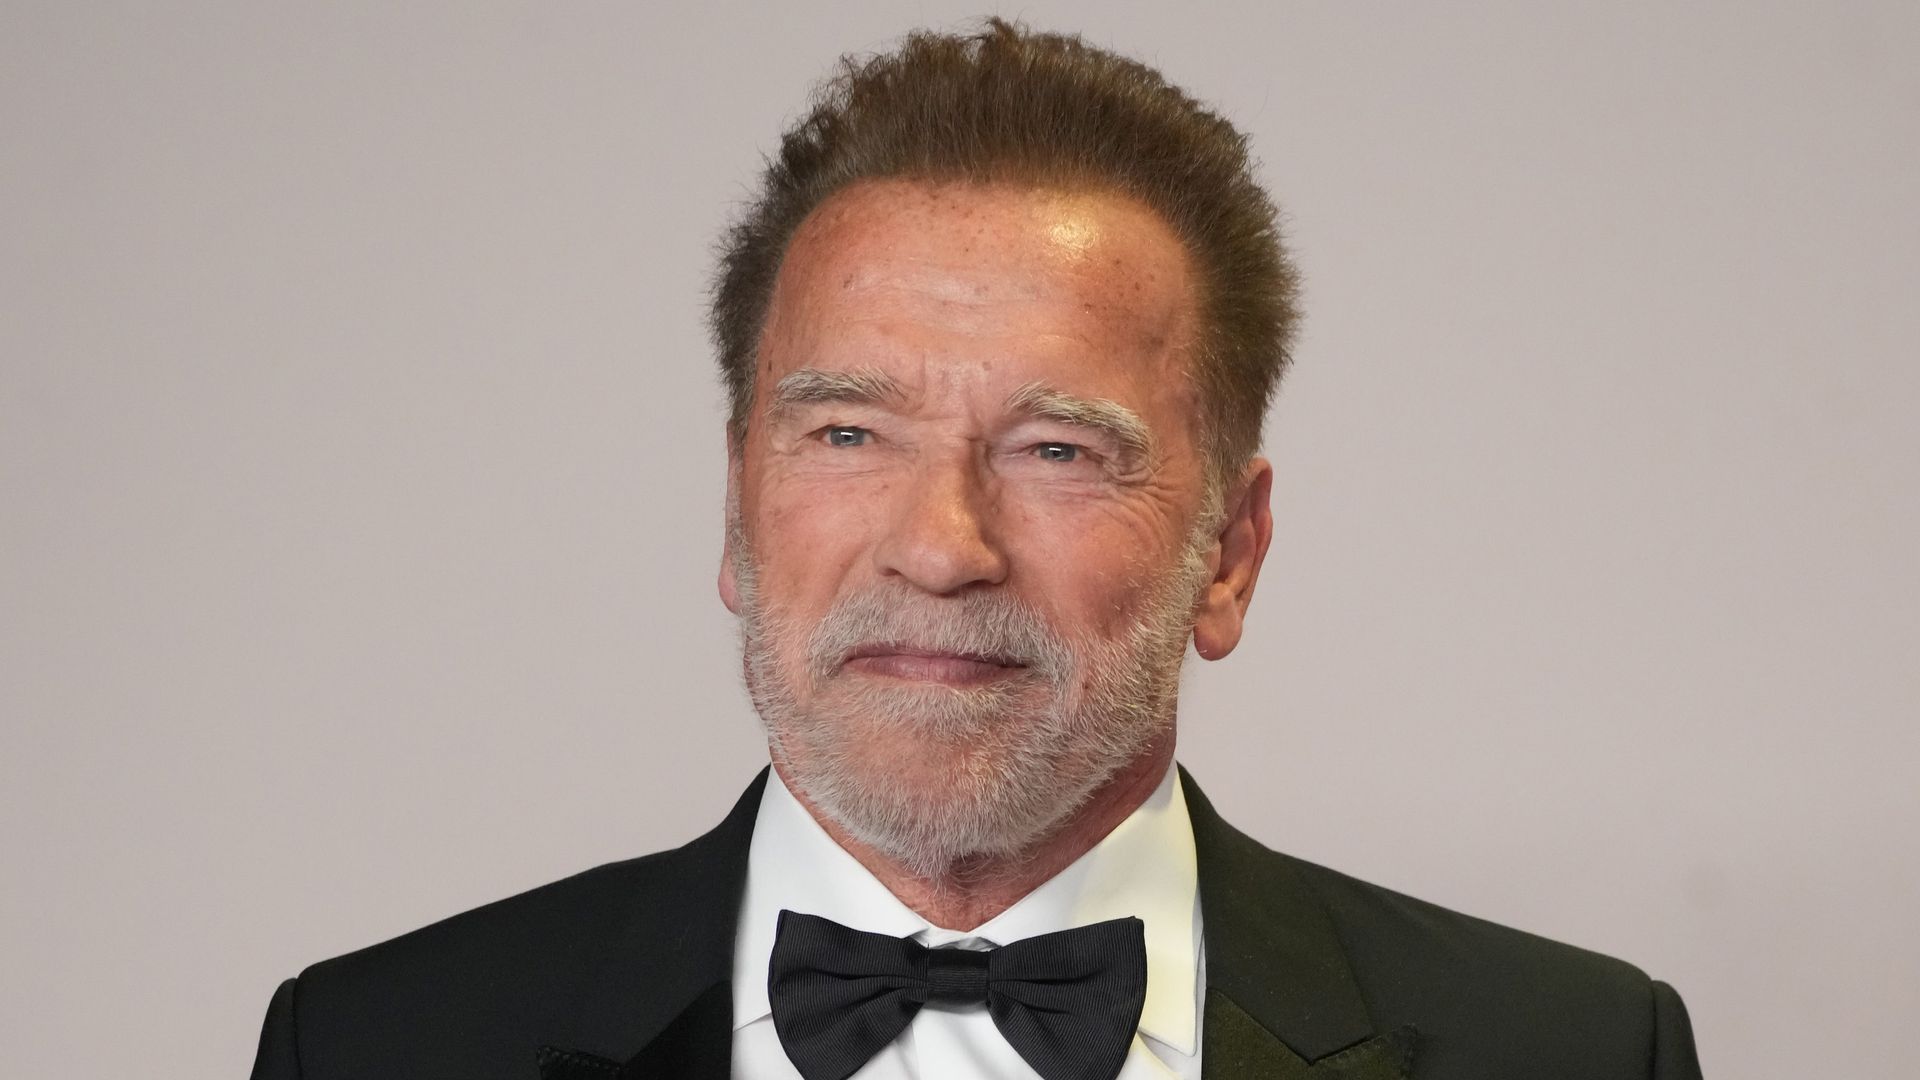 Arnold Schwarzenegger, 76, shares first photo since getting pacemaker in new update